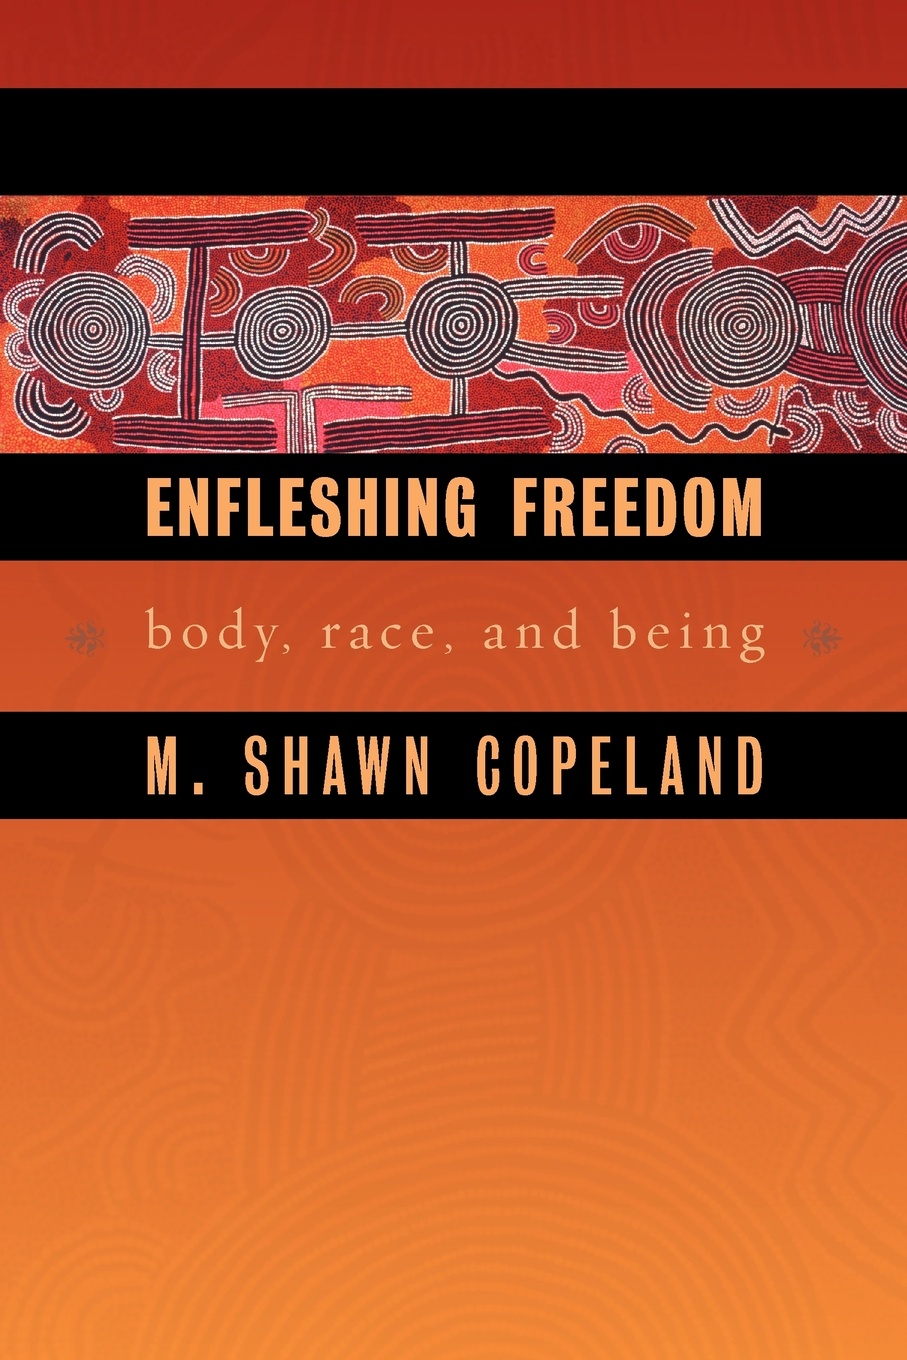 Enfleshing Freedom. Body, Race, and Being